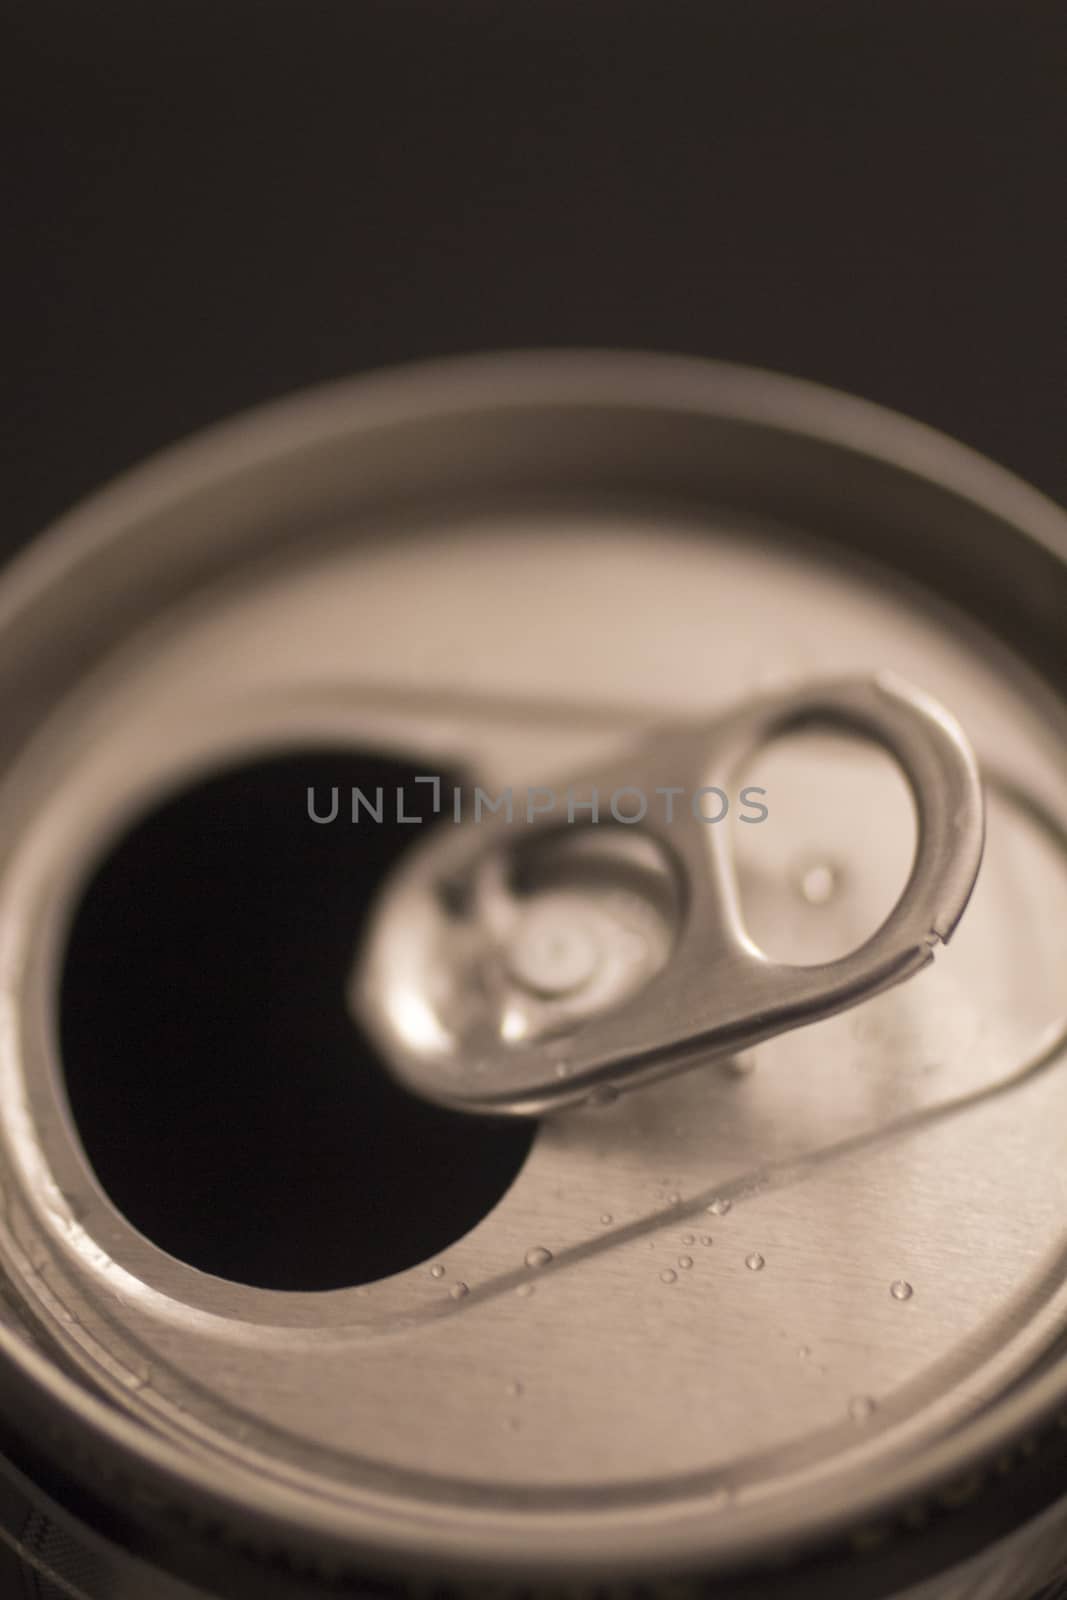 Soda refreshment cola soft drink can close-up by edwardolive